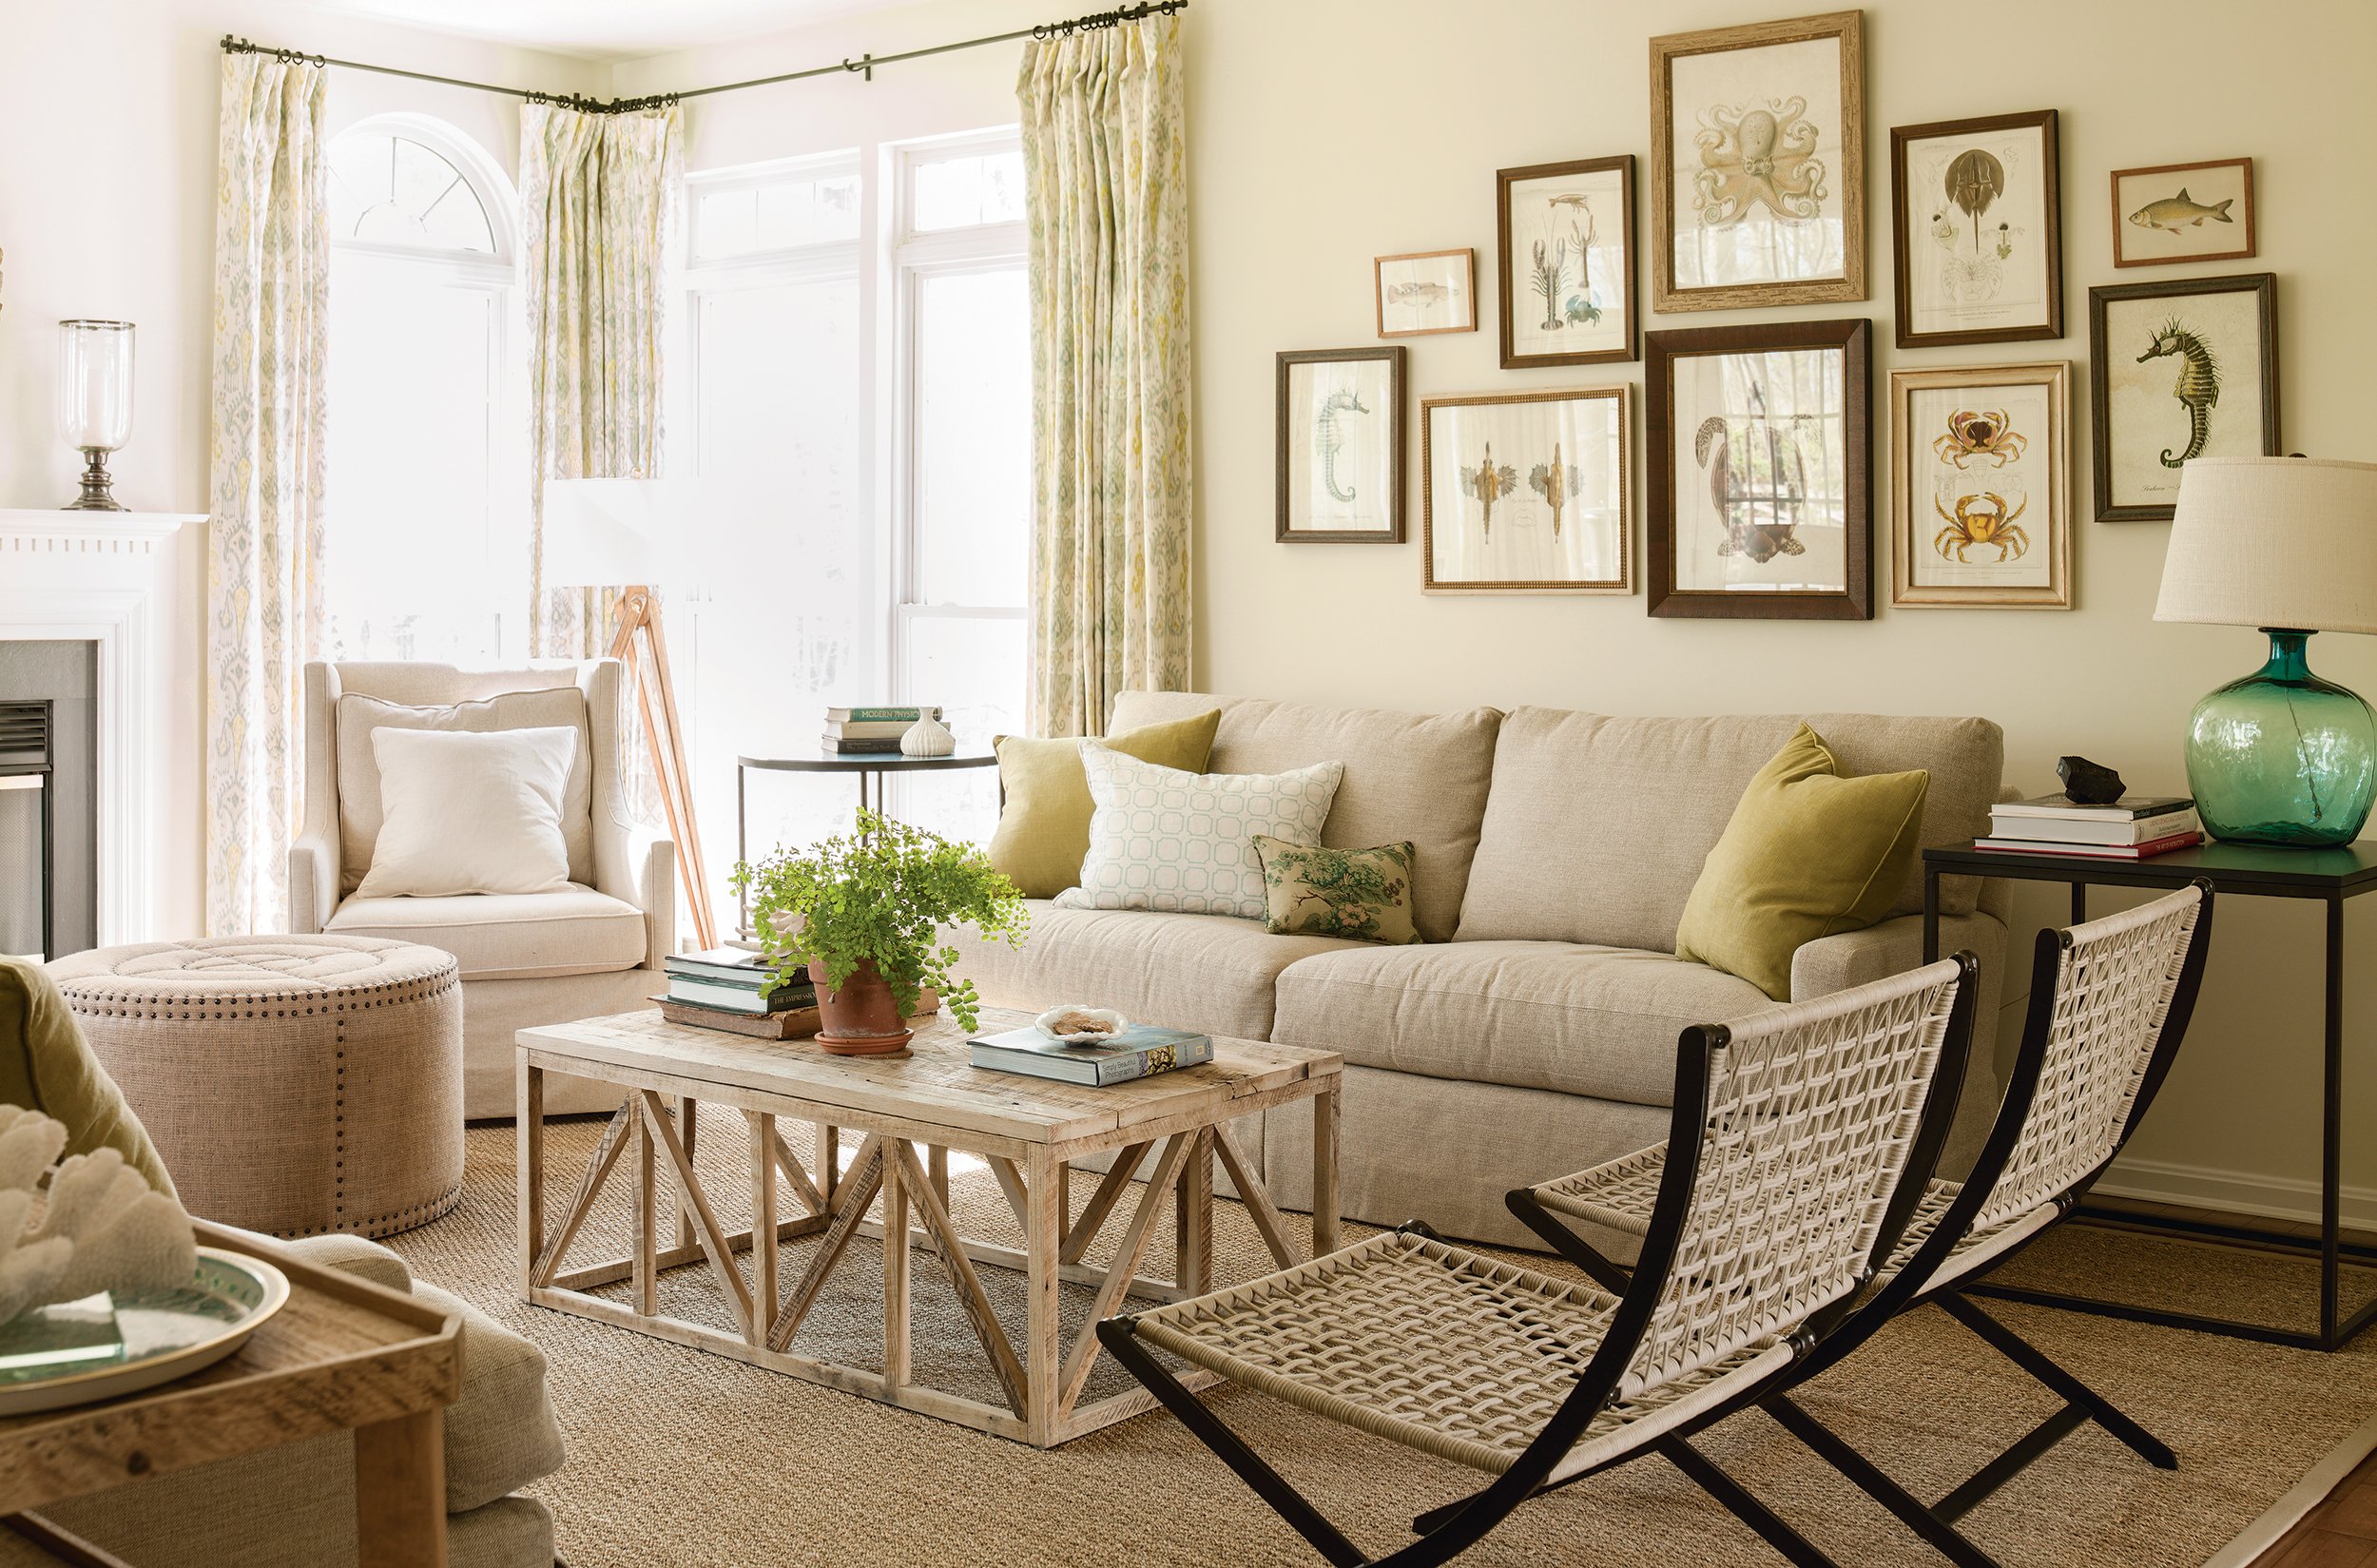 10 Easy Ways to Make Your Home More Peaceful